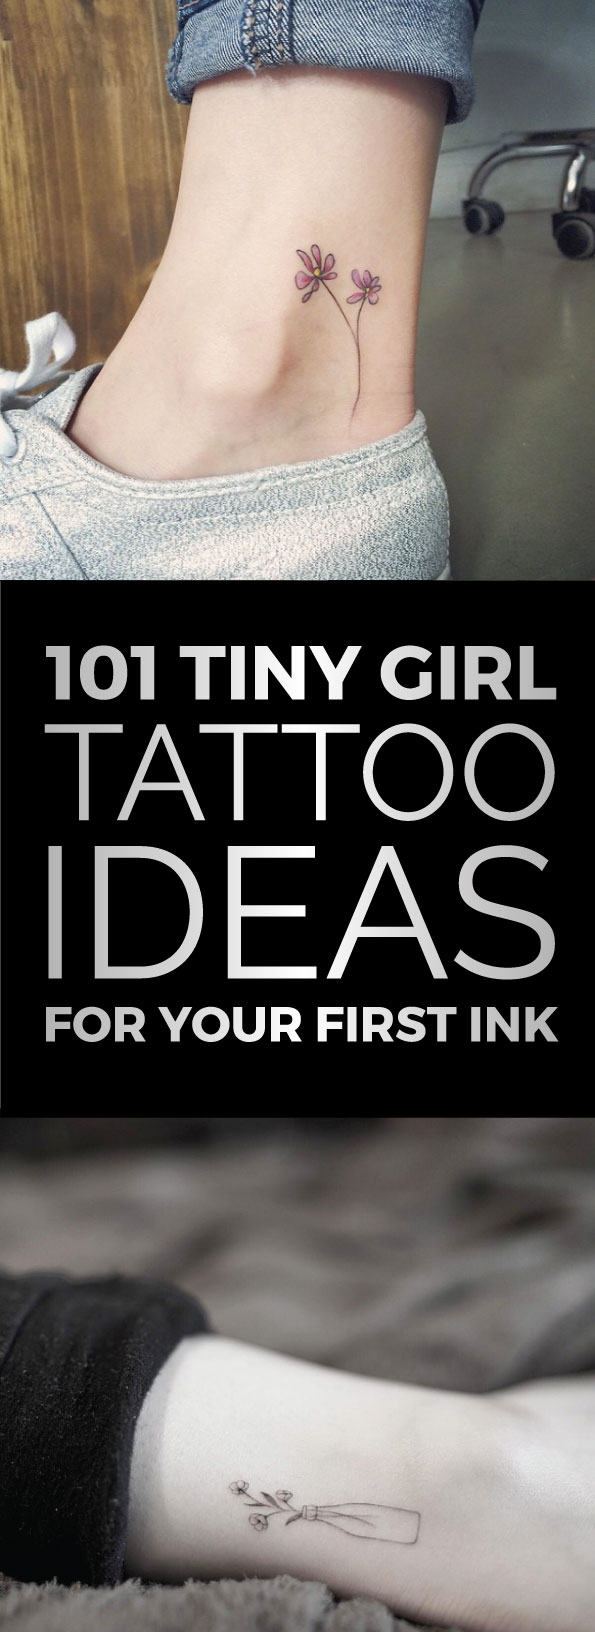 101 Tiny Girl Tattoo Ideas For Your First Ink TattooBlend